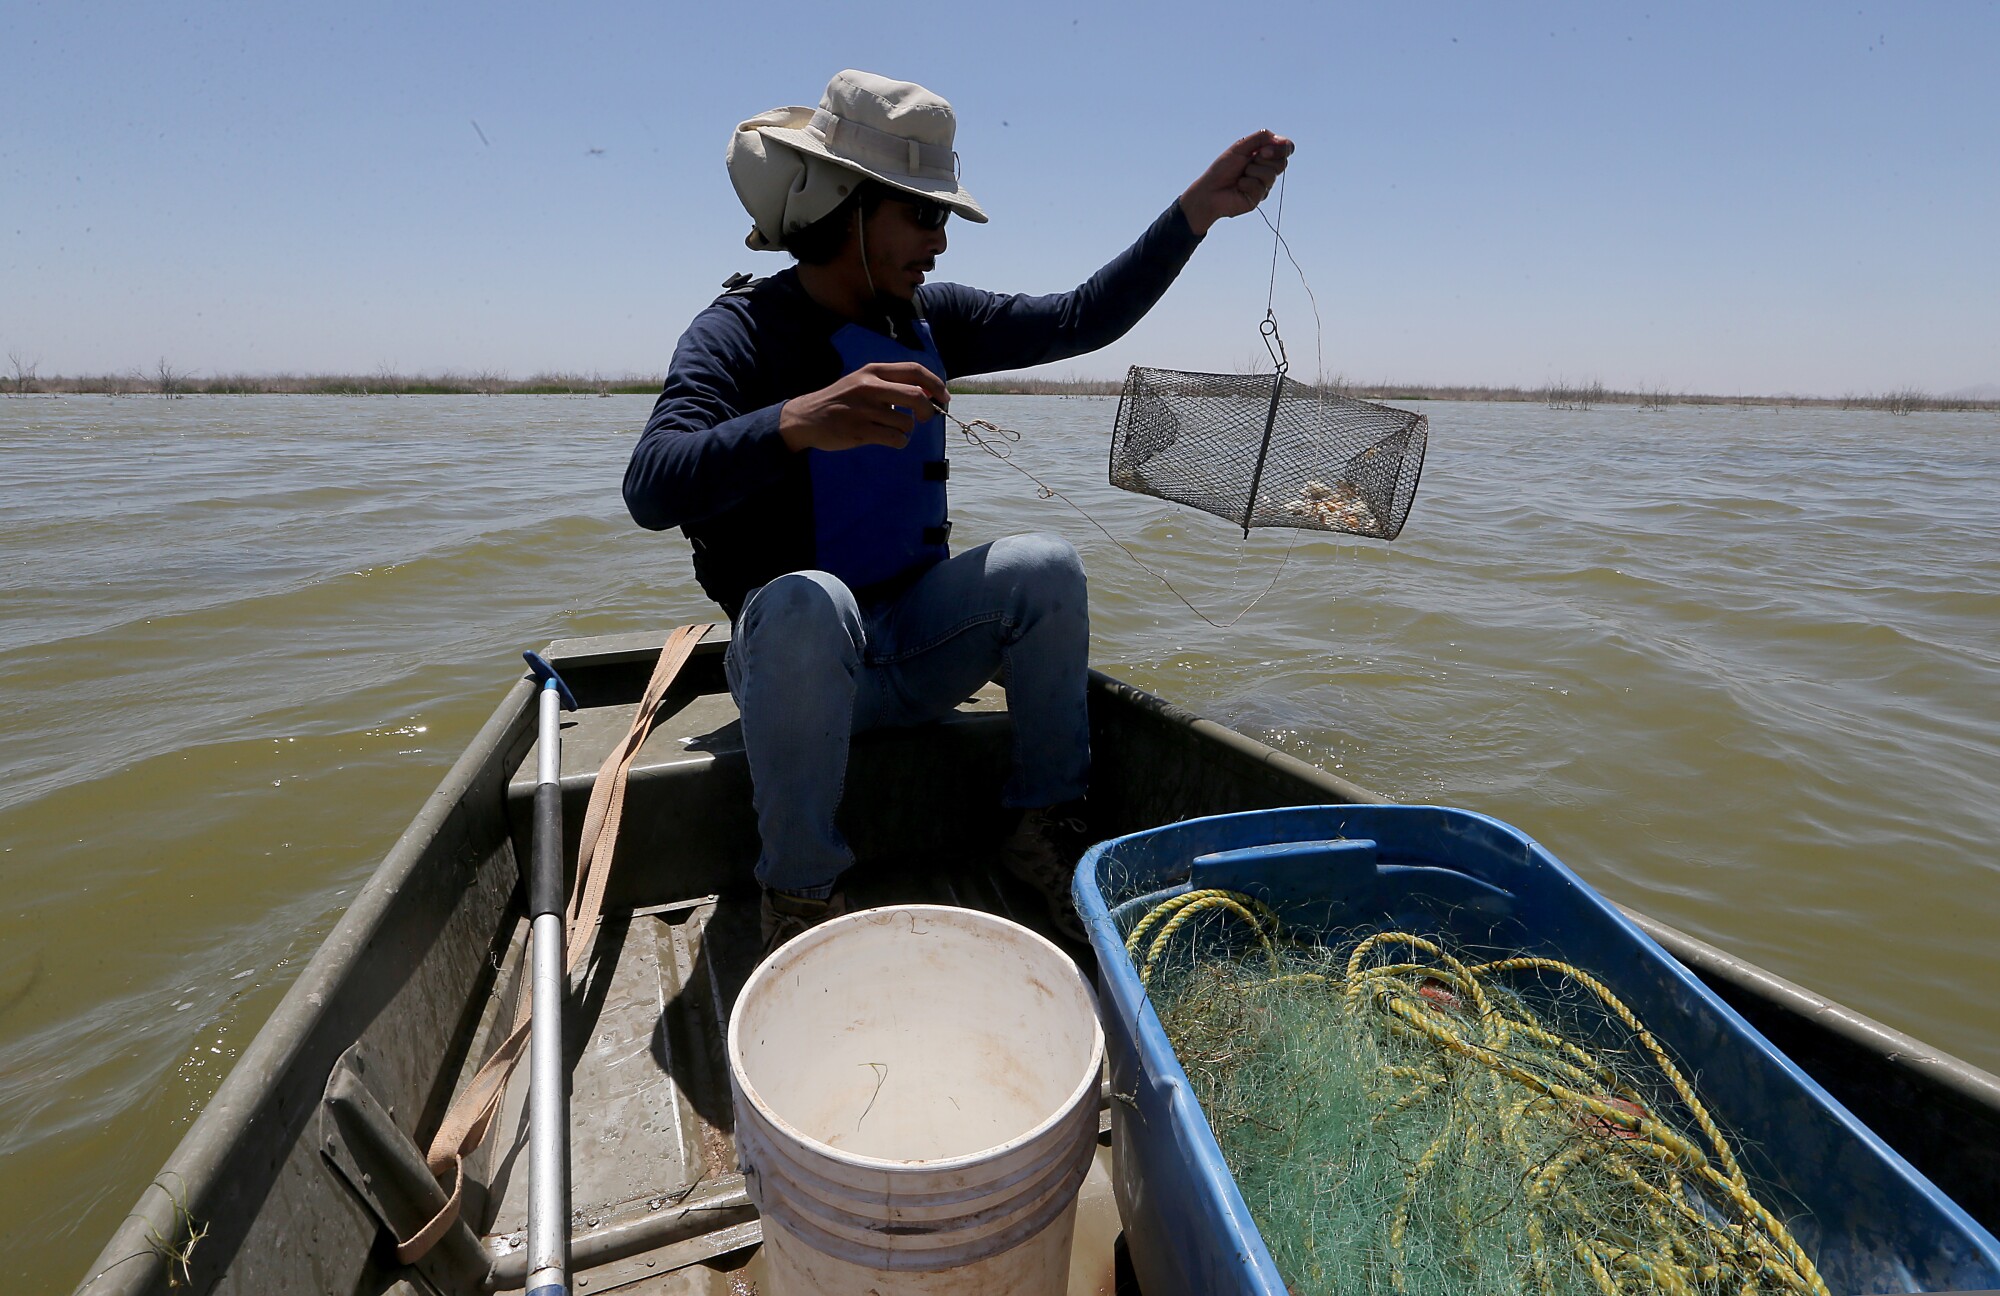 Conservationist Israel Mateo Sánchez Leyva collects fish during a survey in the Colorado River's estuary.